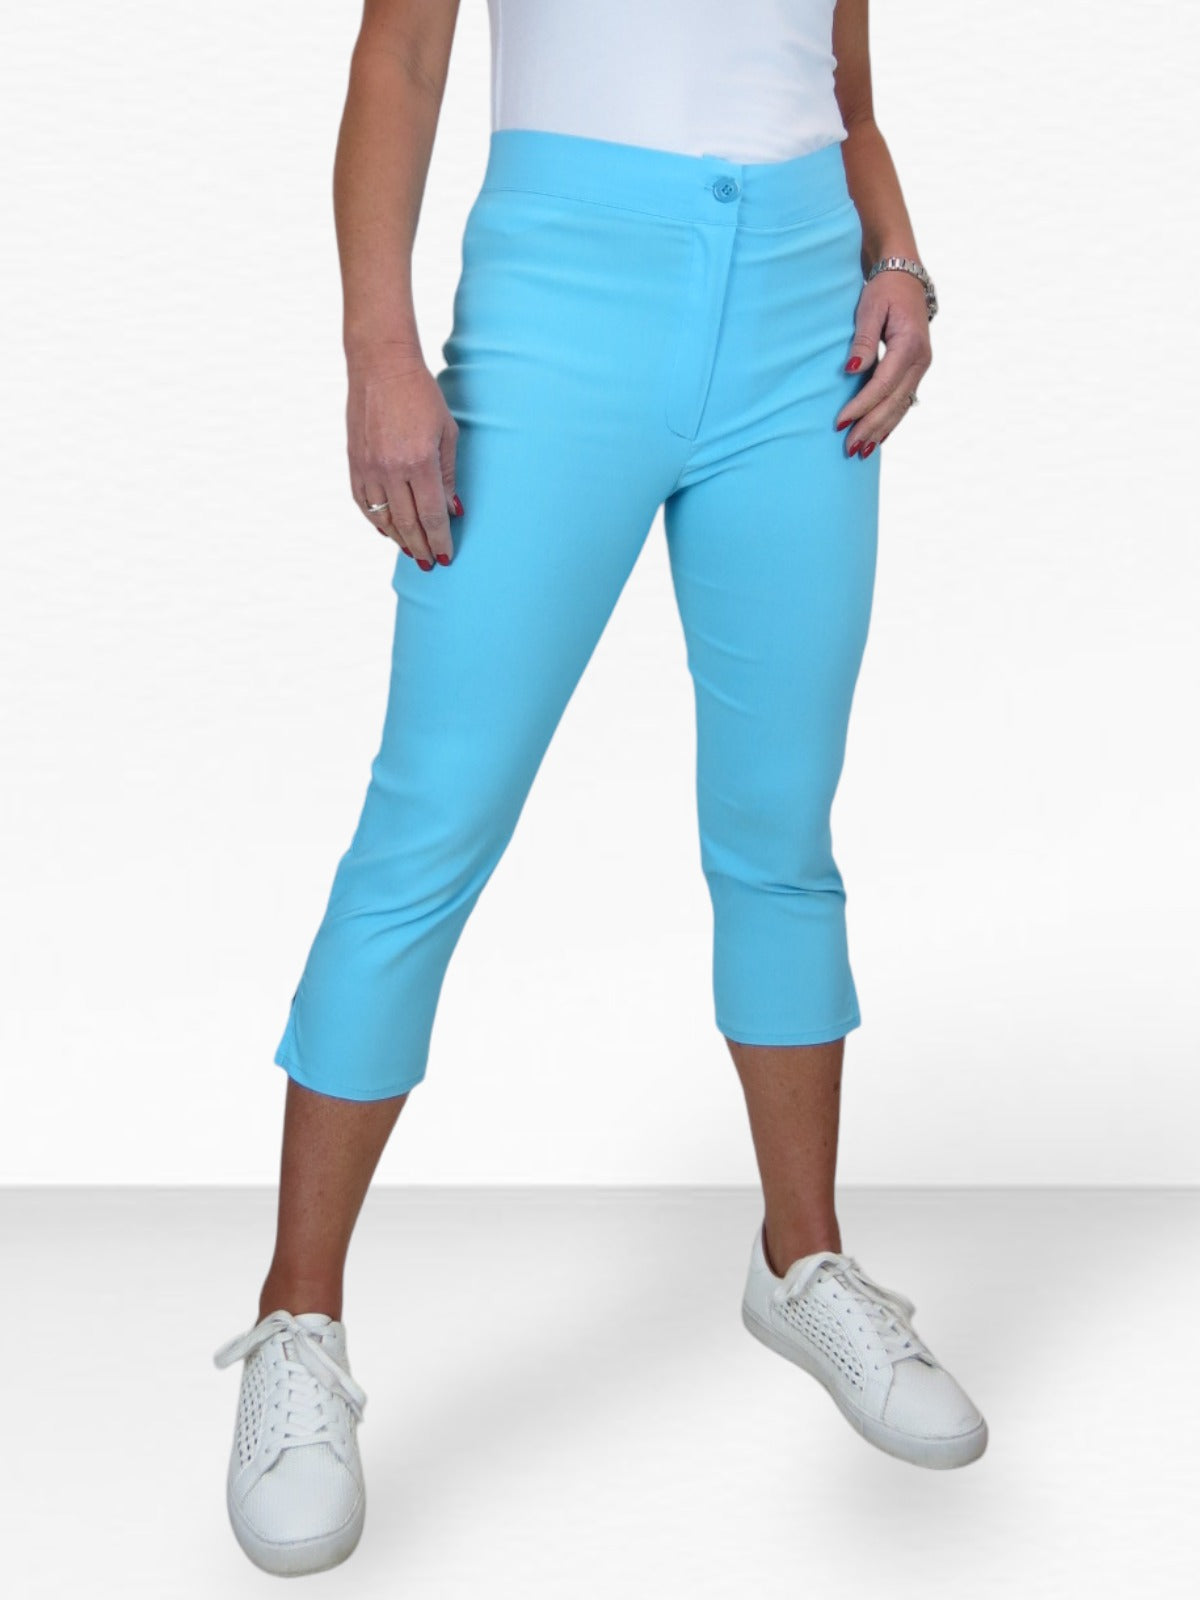 High Waisted Cropped Skinny Pedal Pushers Trousers Light Turquoise